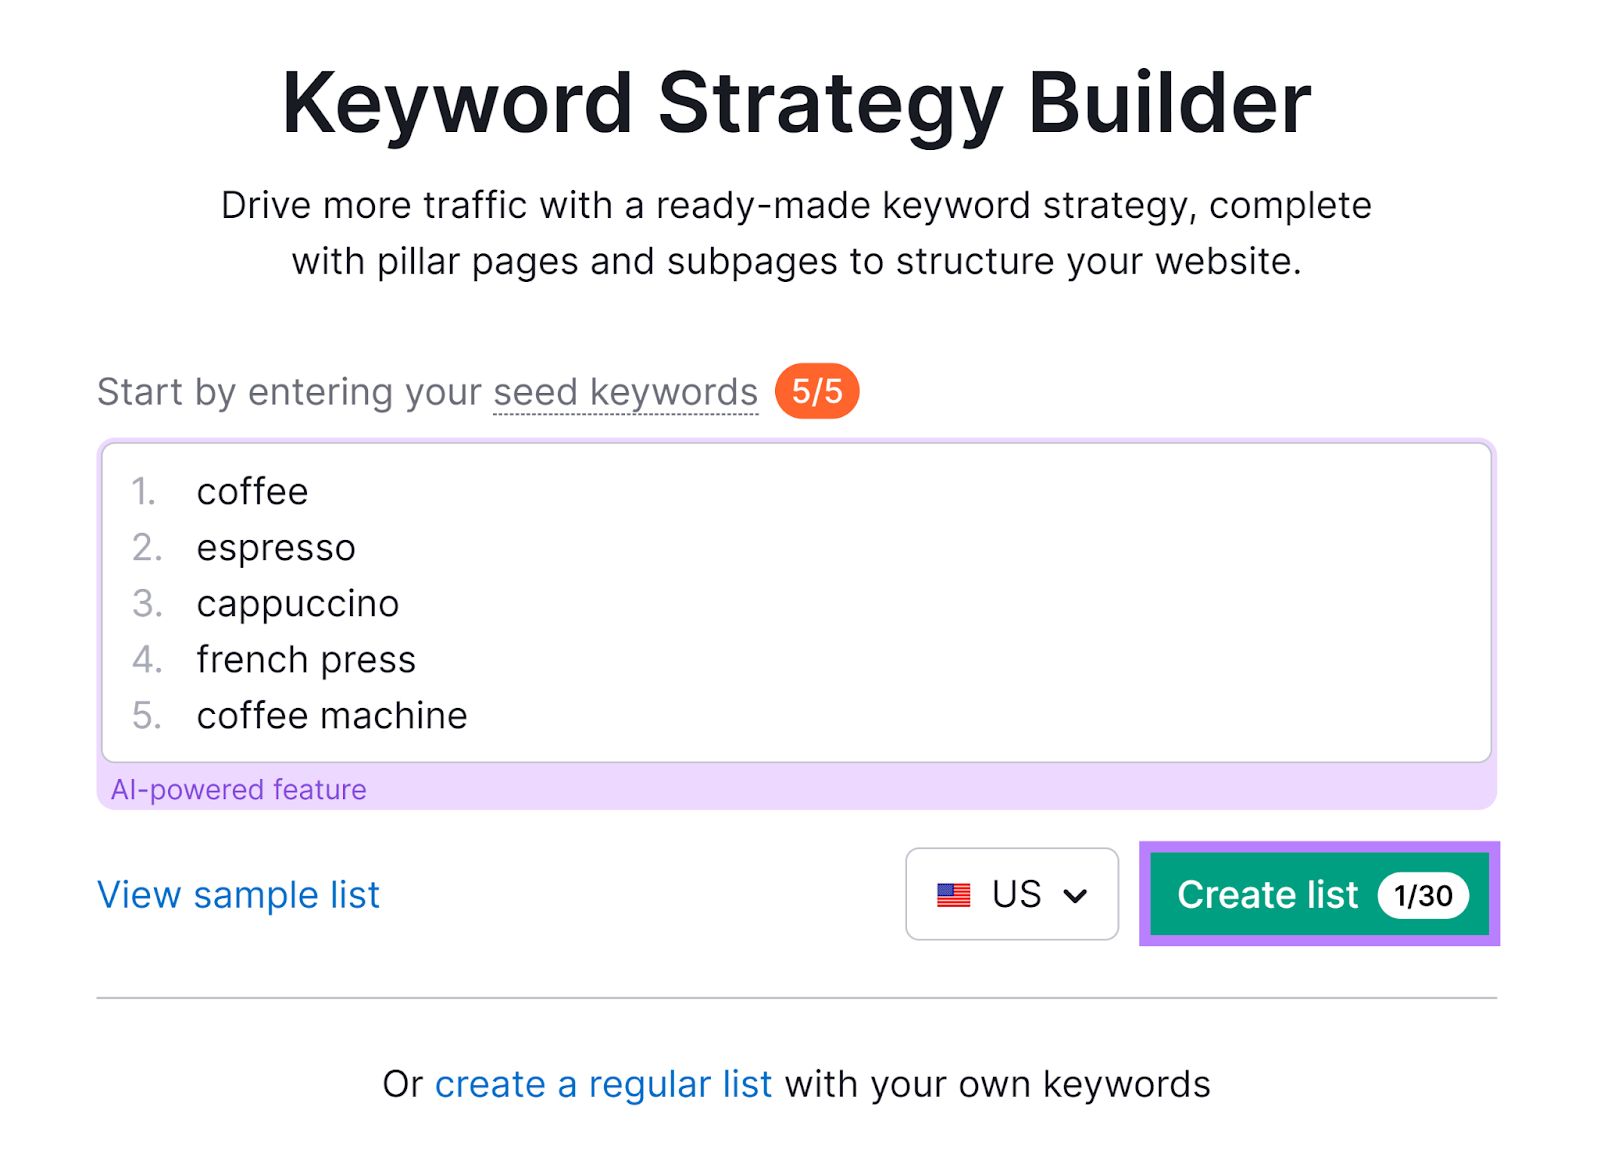 Keyword Strategy Builder tool start with coffee-related keywords and create list button highlighted.